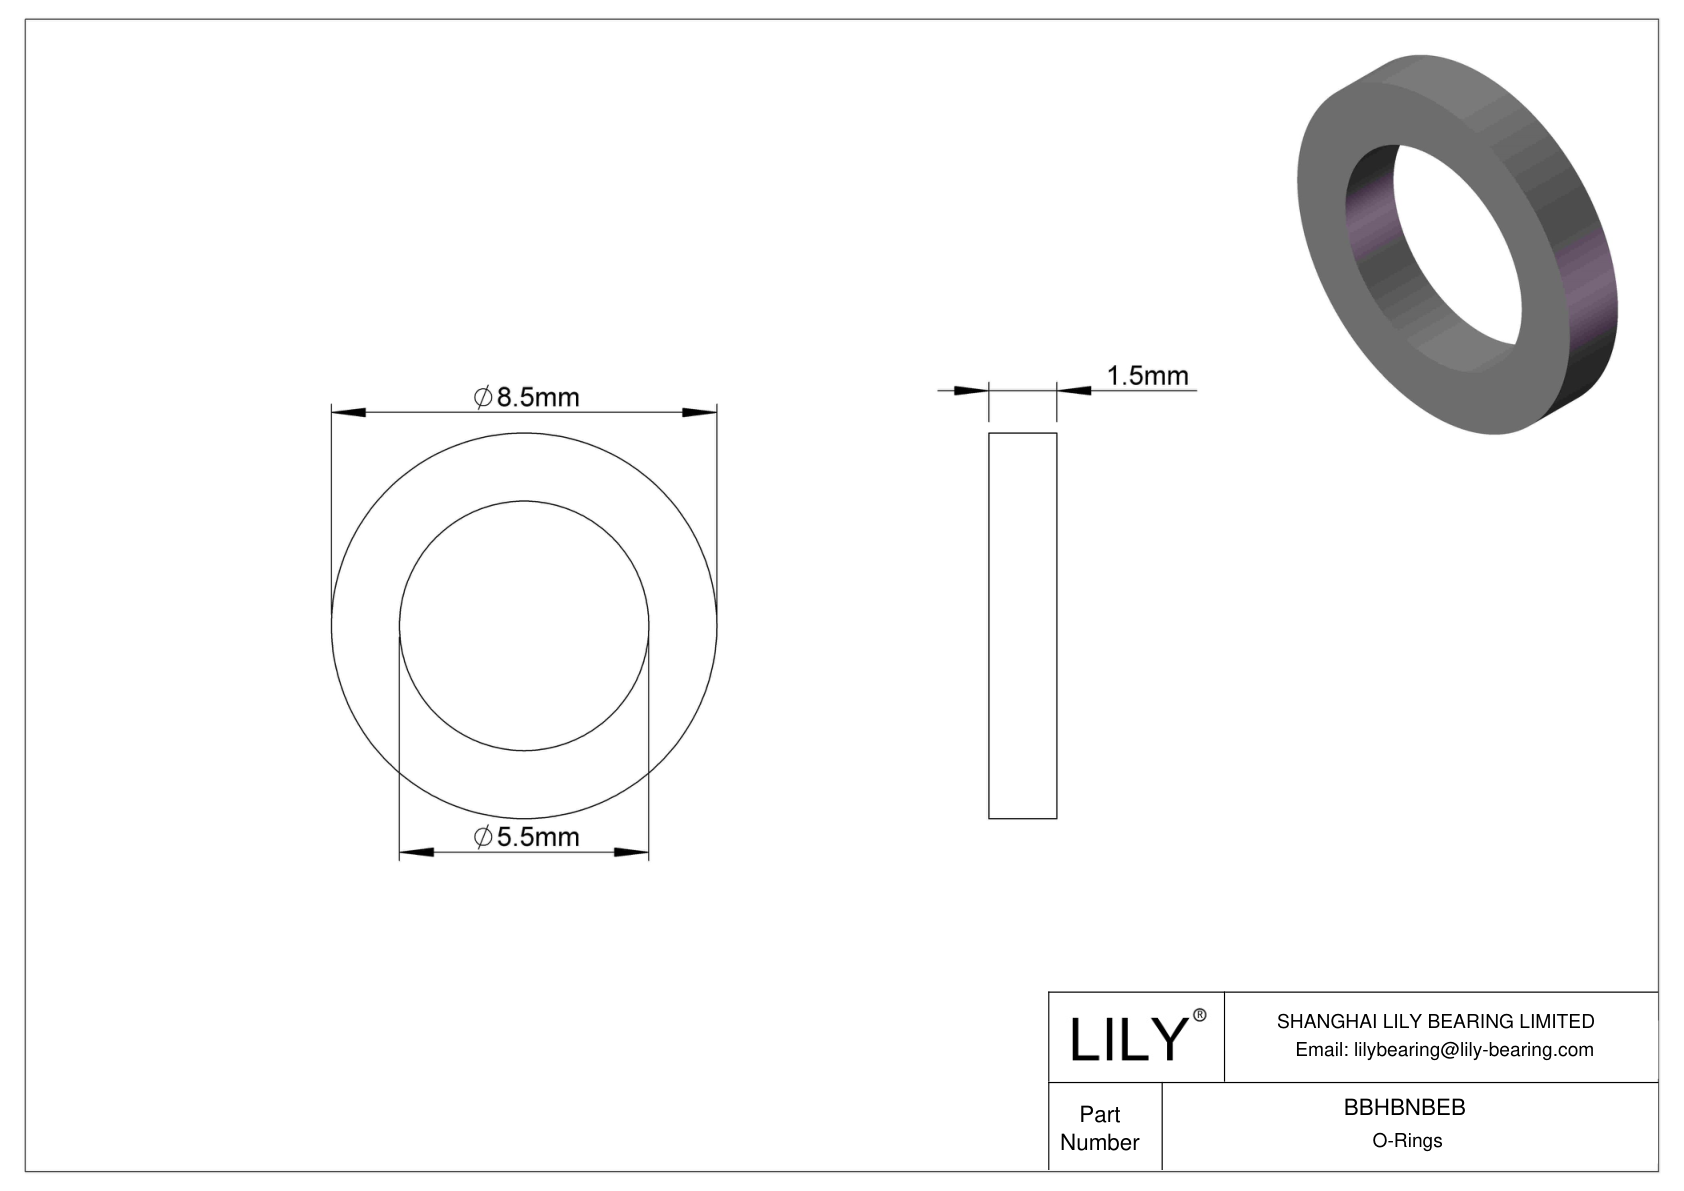 BBHBNBEB Oil Resistant O-Rings Square cad drawing